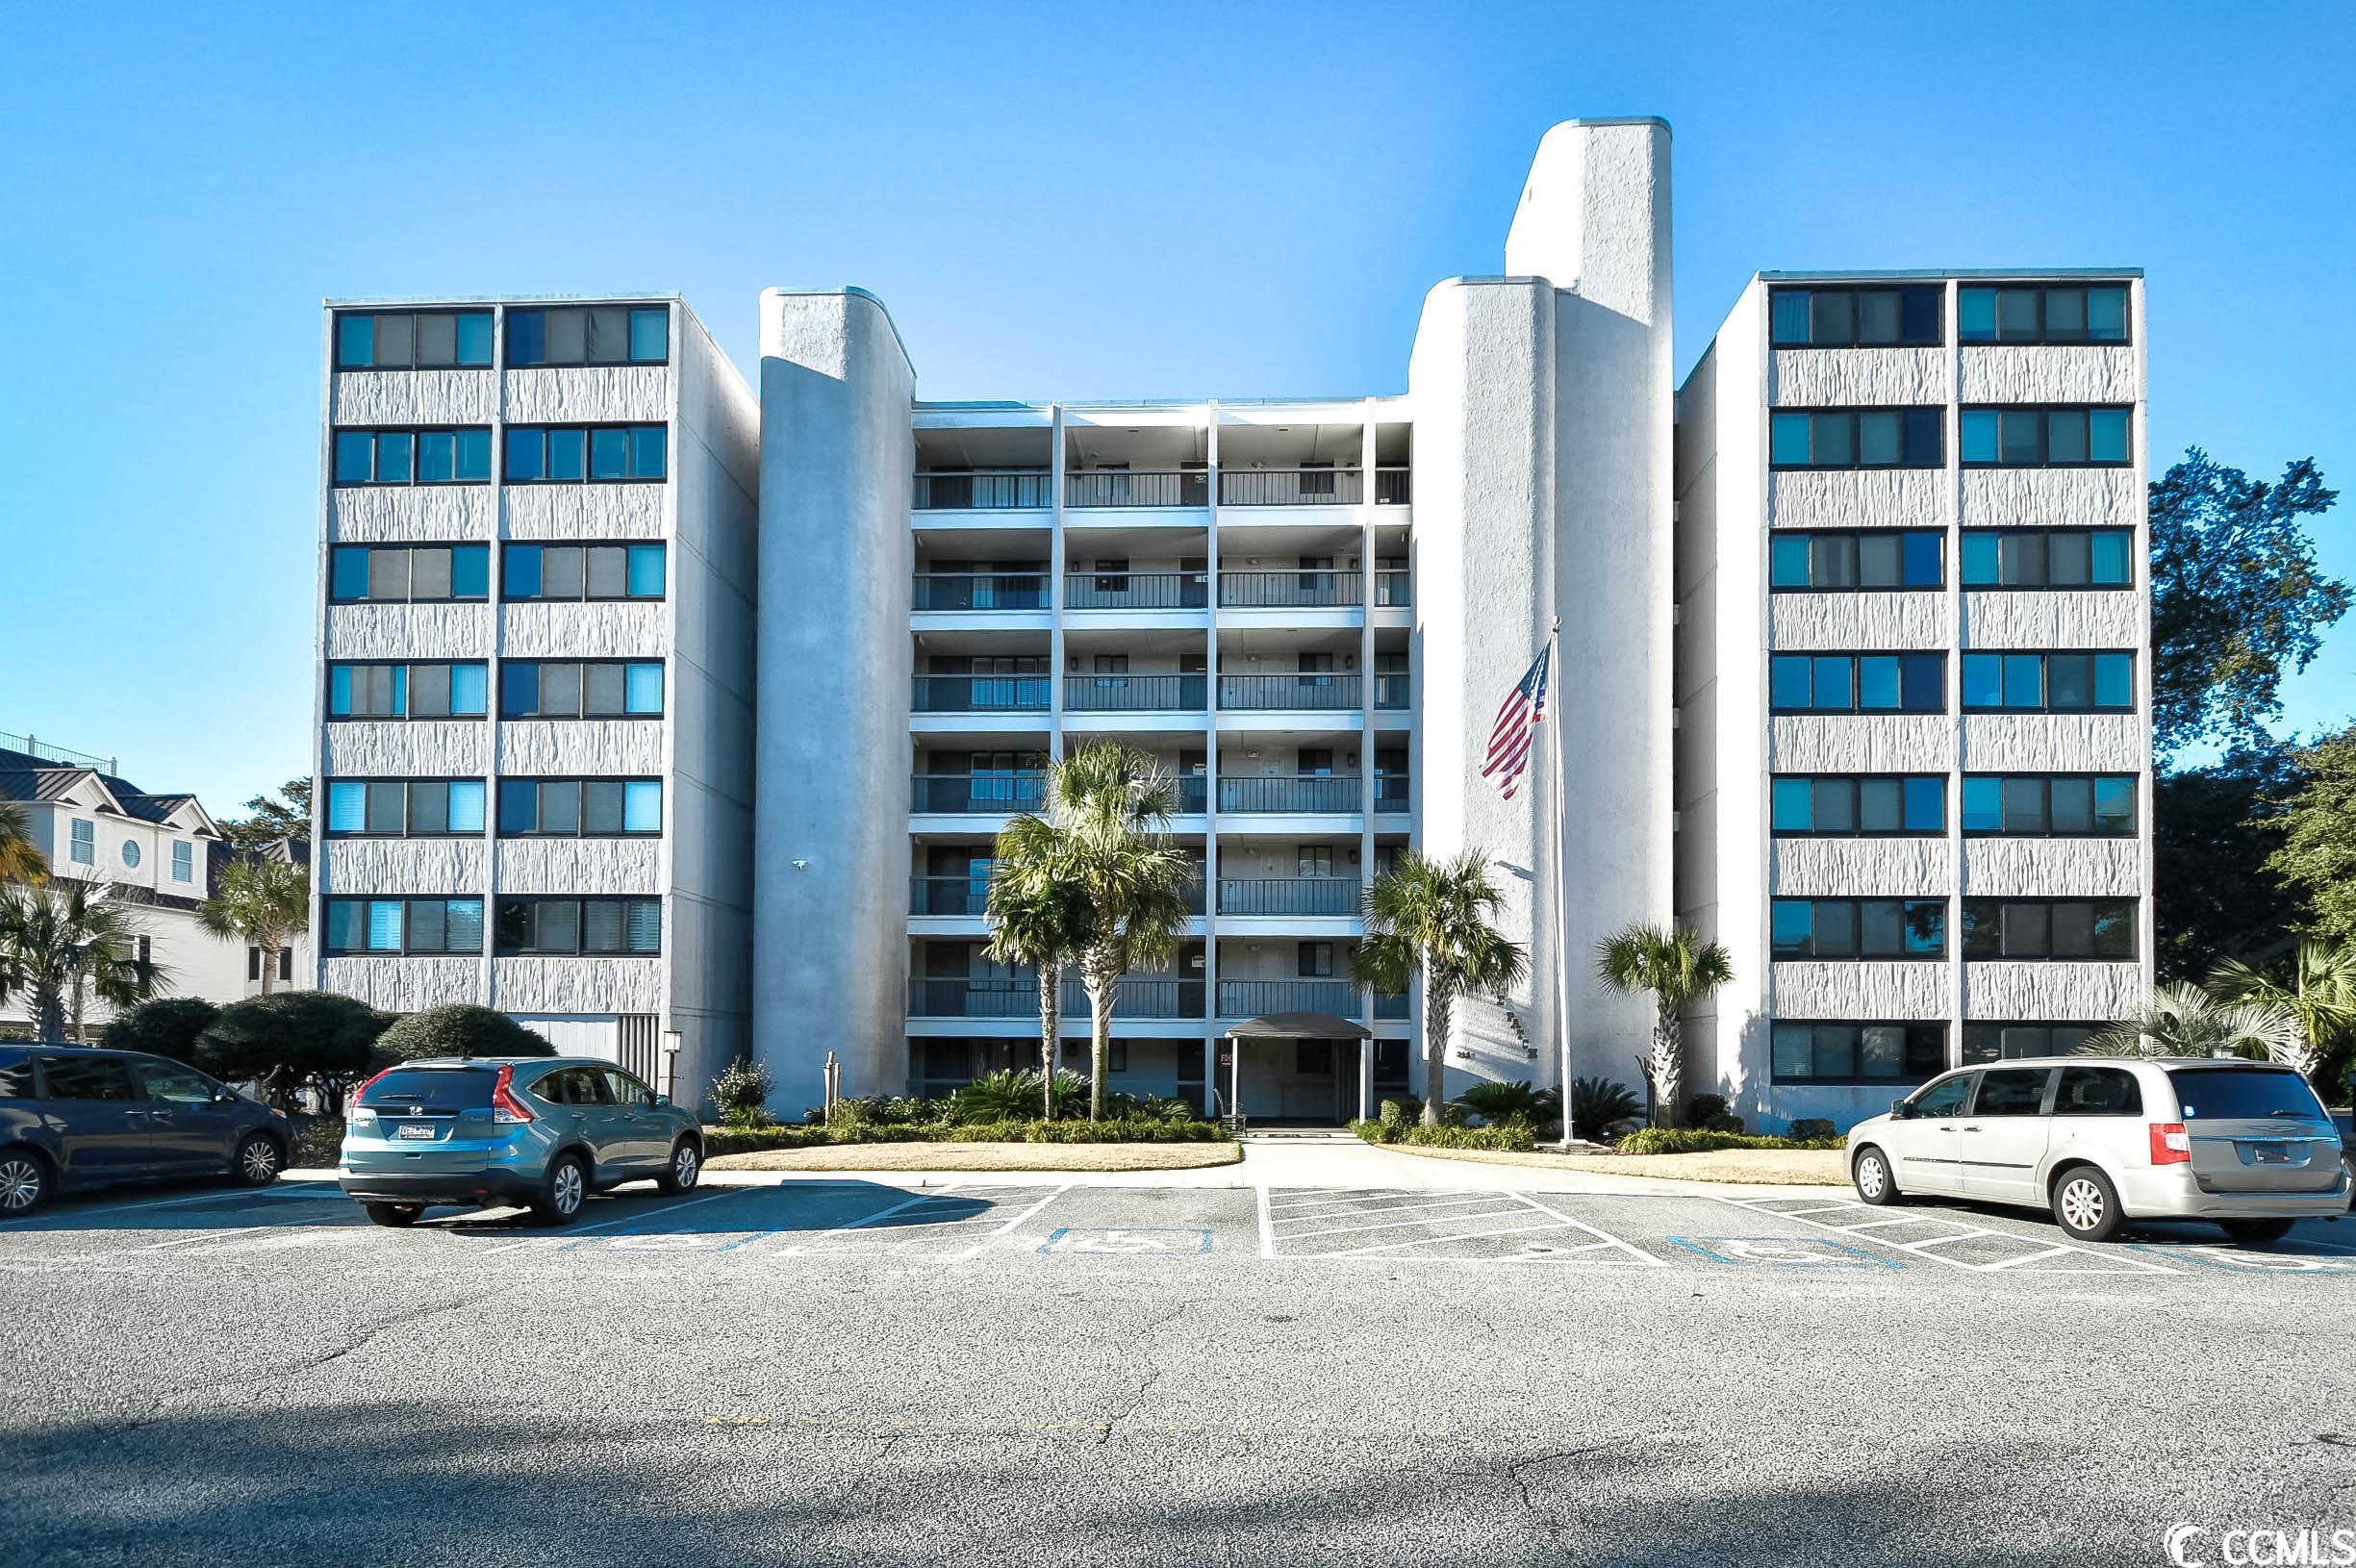 elevator building only steps from the beach! these units rarely come on the market! perfect for a primary or vacation home. huge bedrooms 12x16.5 each! enjoy entertaining your friends on the 37 foot long balcony. hurry this one won't last long!